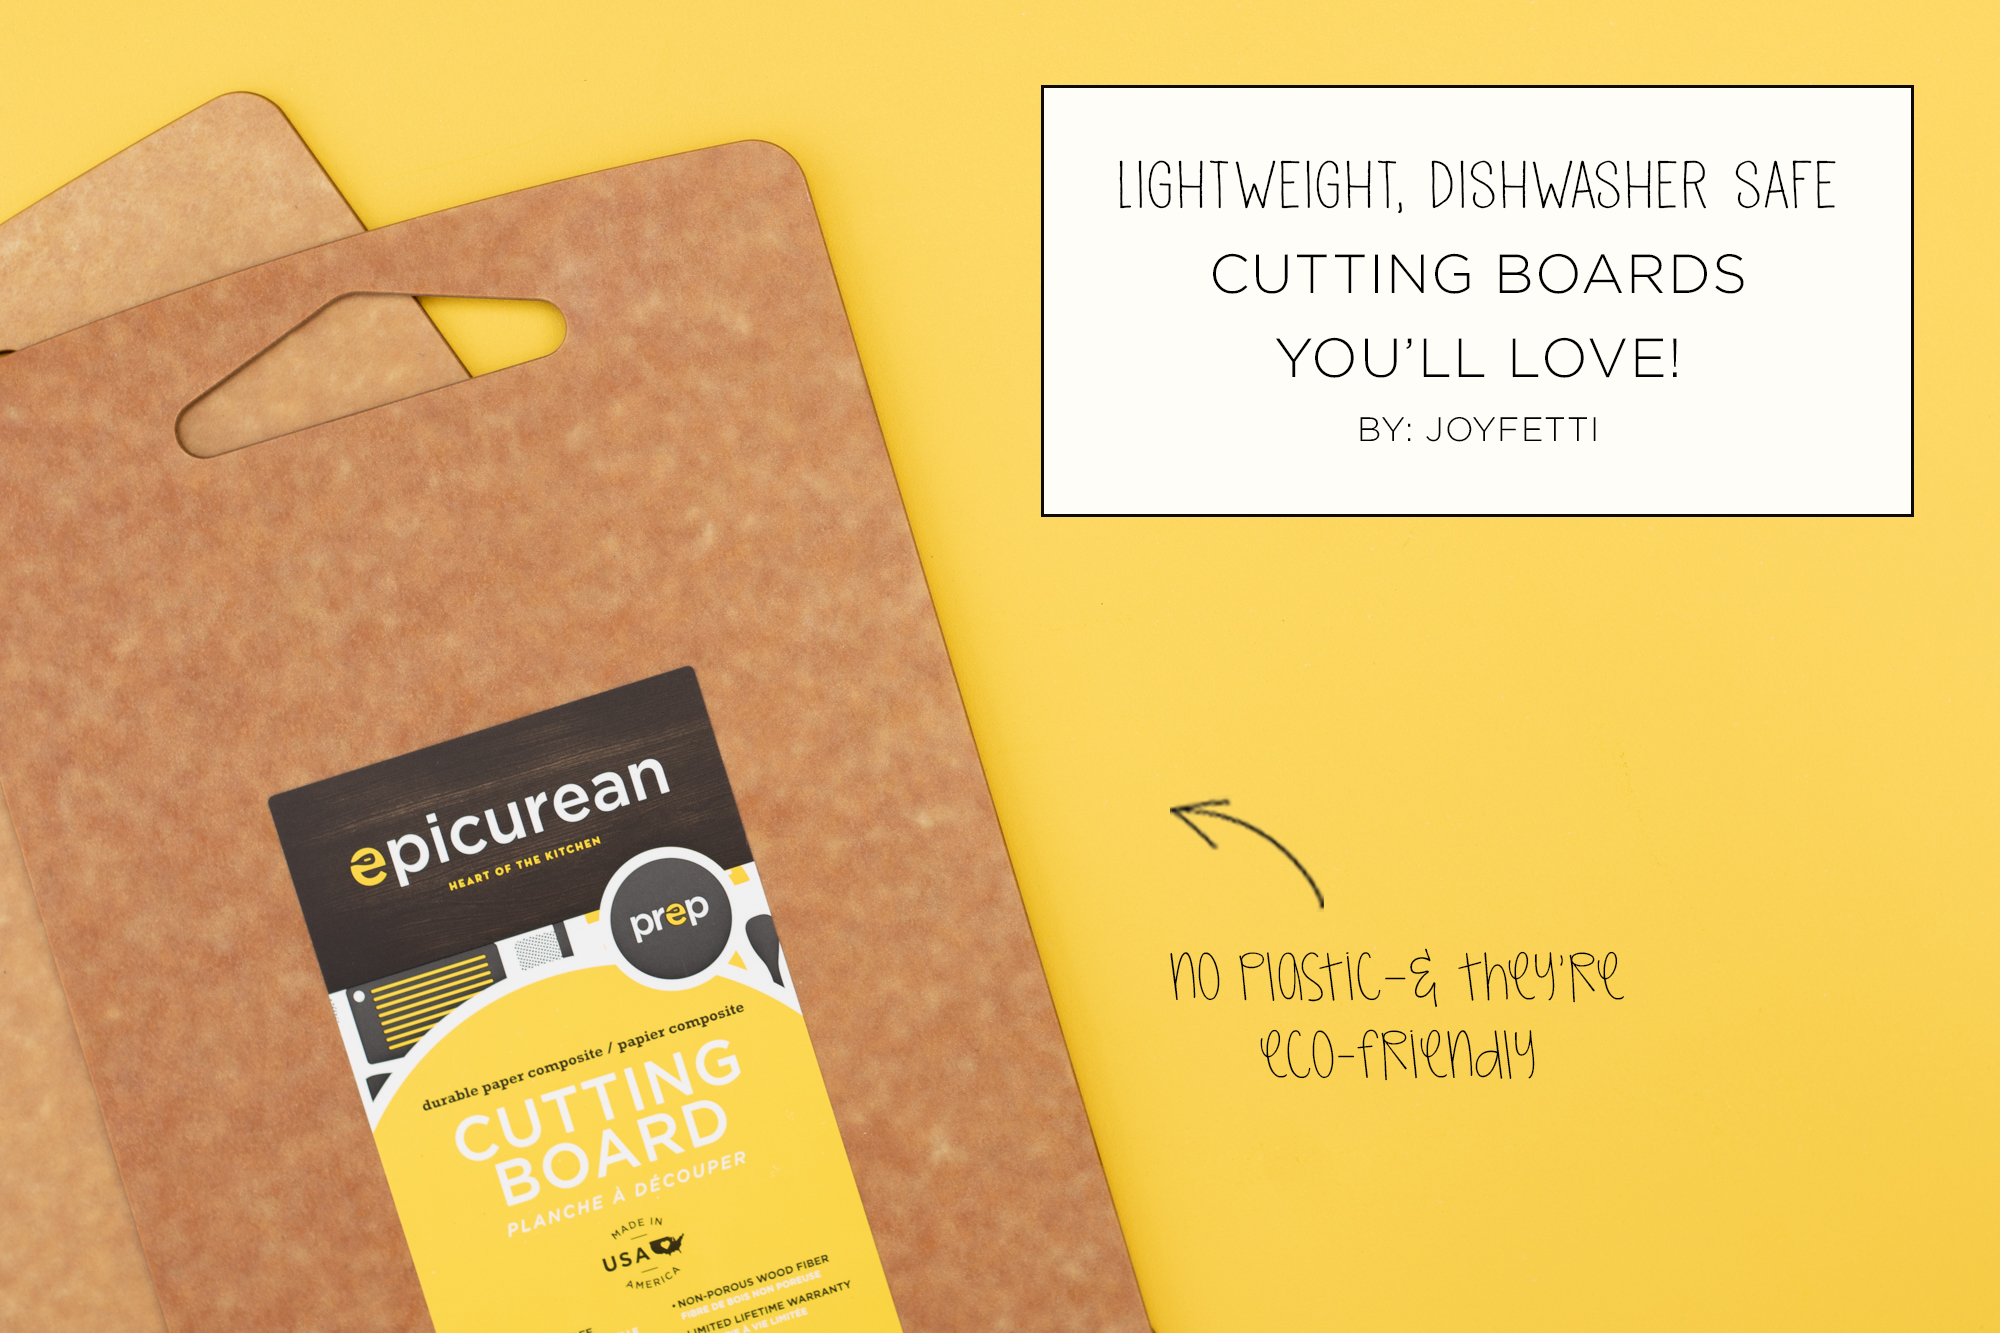 https://joyfetti.com/wp-content/uploads/2020/07/lightweight-cutting-boards-that-are-dishwasher-safe-and-wont-seep-plastic-into-your-food_lightweight-dishwasher-safe-cutting-boards-you-will-love_epicurean_joyfetti.com_.jpg